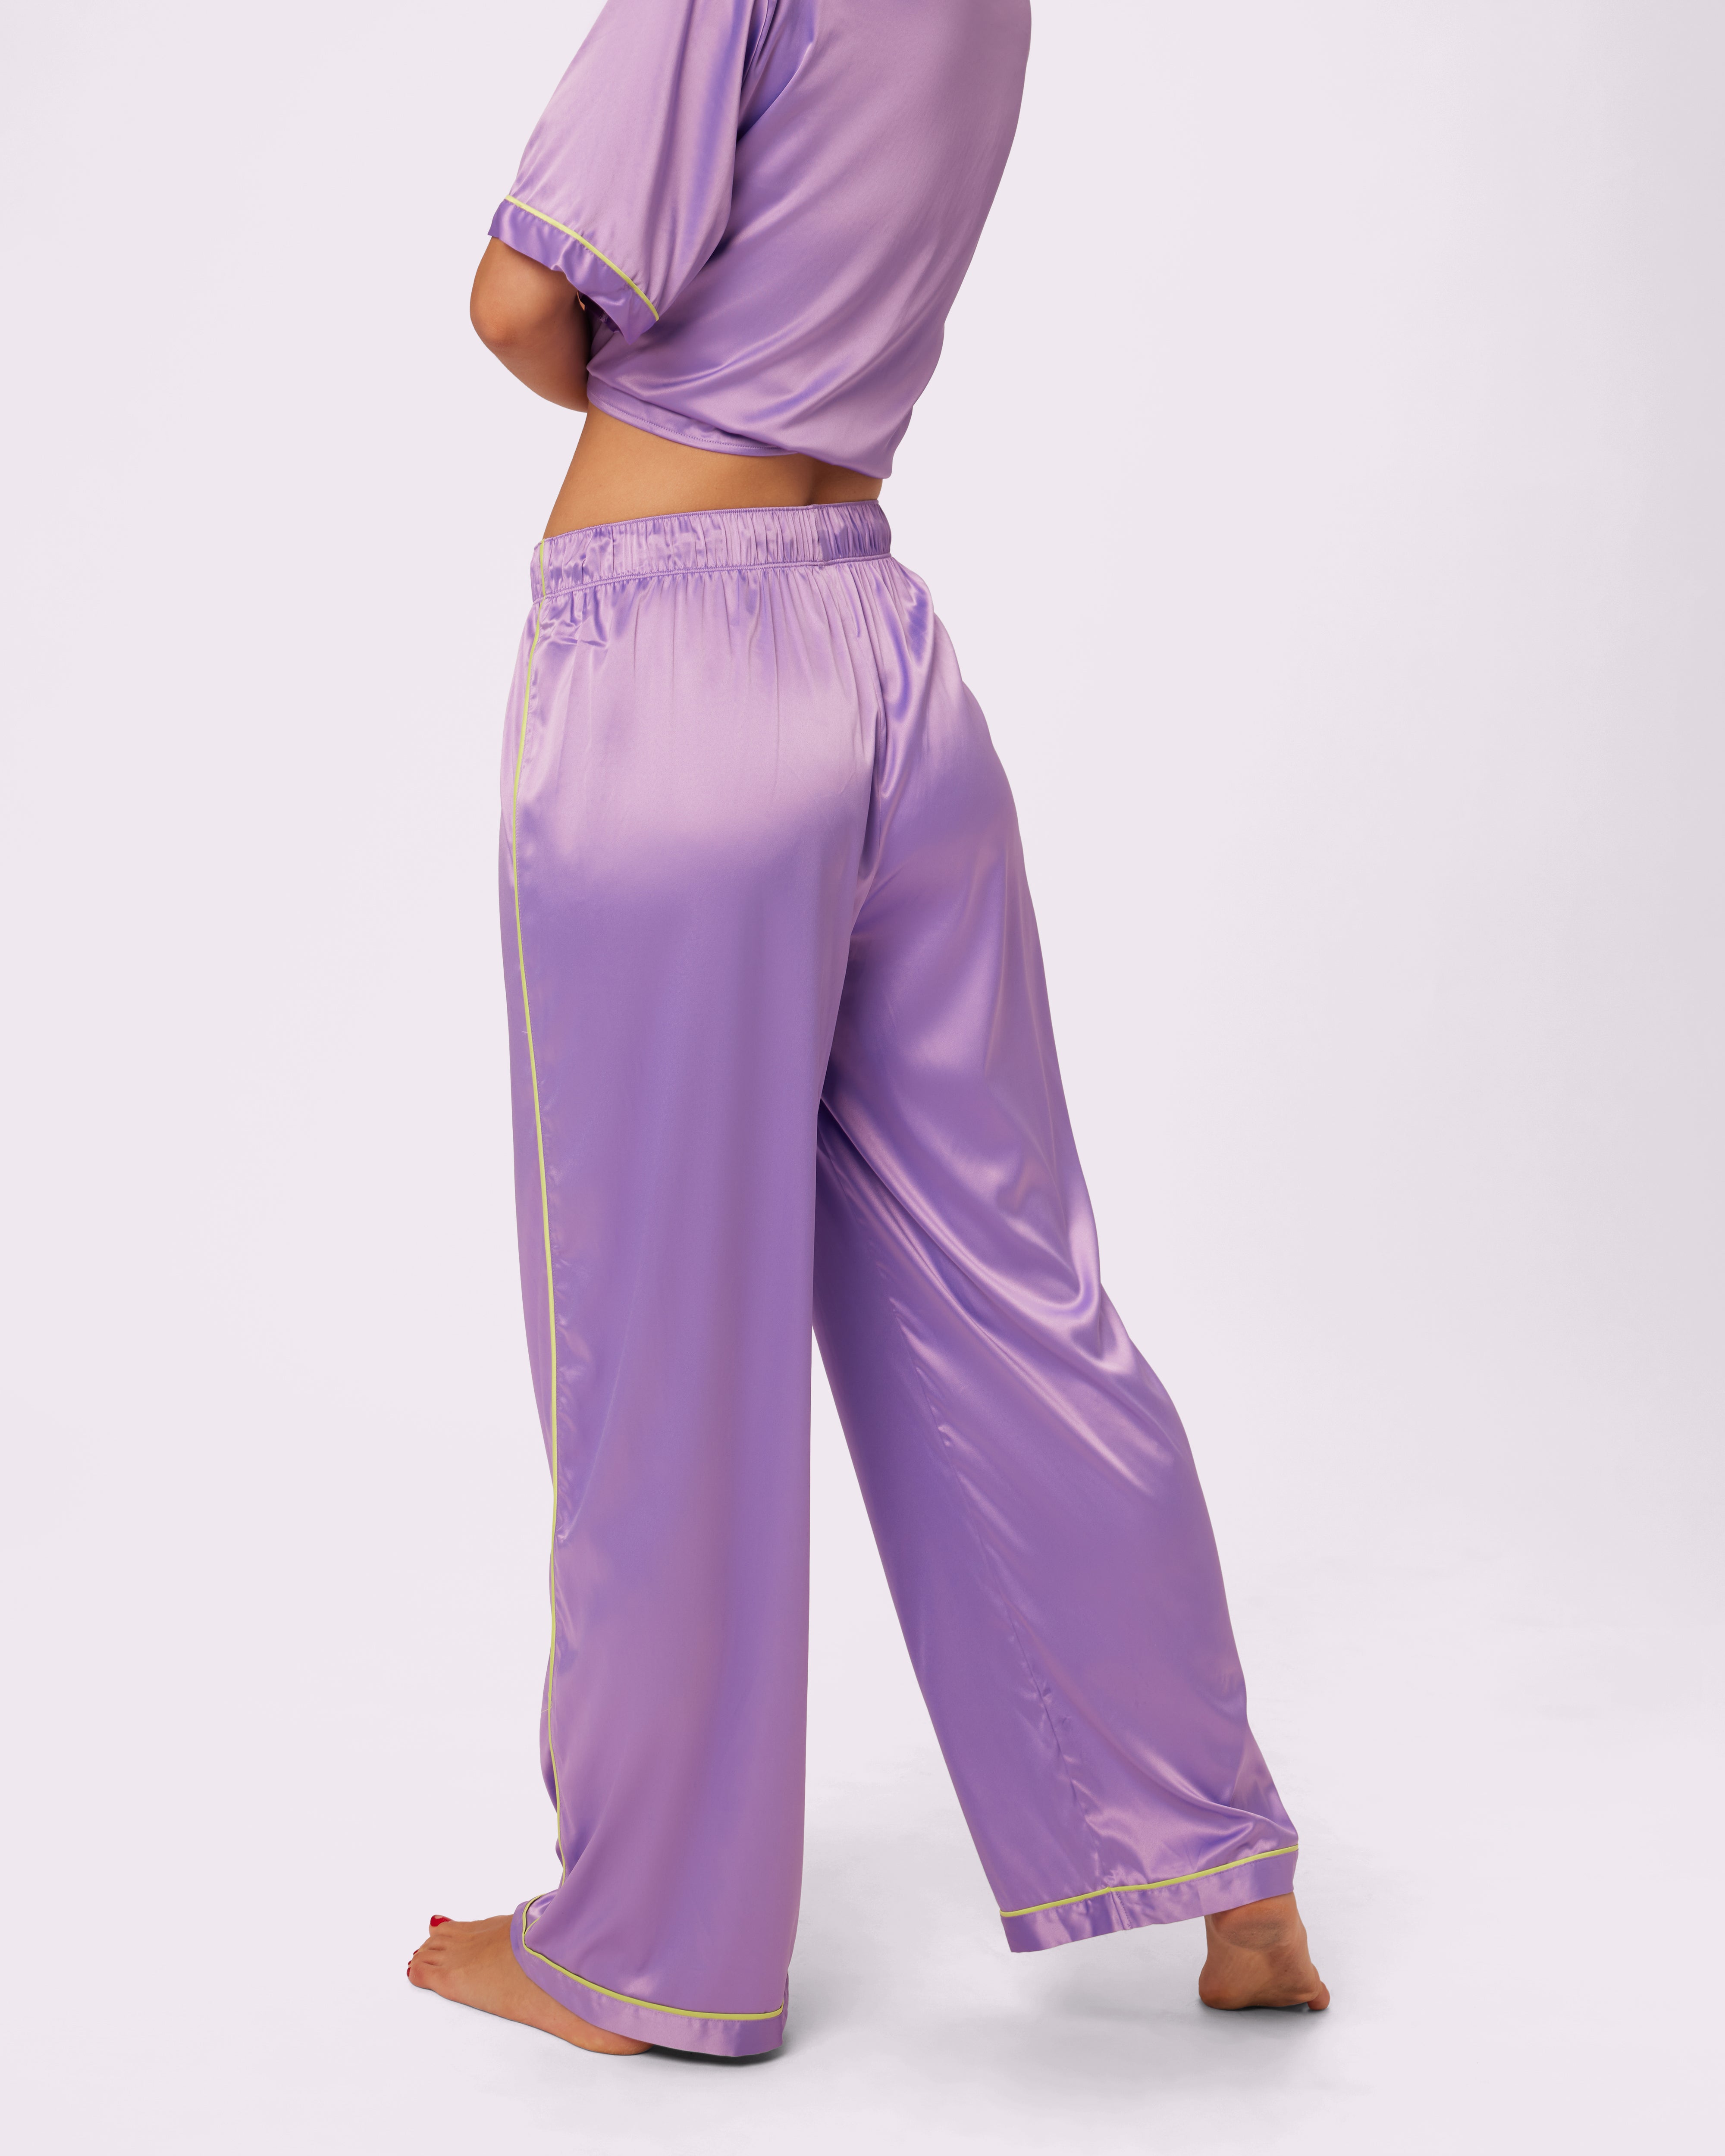 Black And Purple Line Pants Vertical Stripe Print Workout Wide Leg Pants  Woman Oversized Beach Printed Straight Trousers